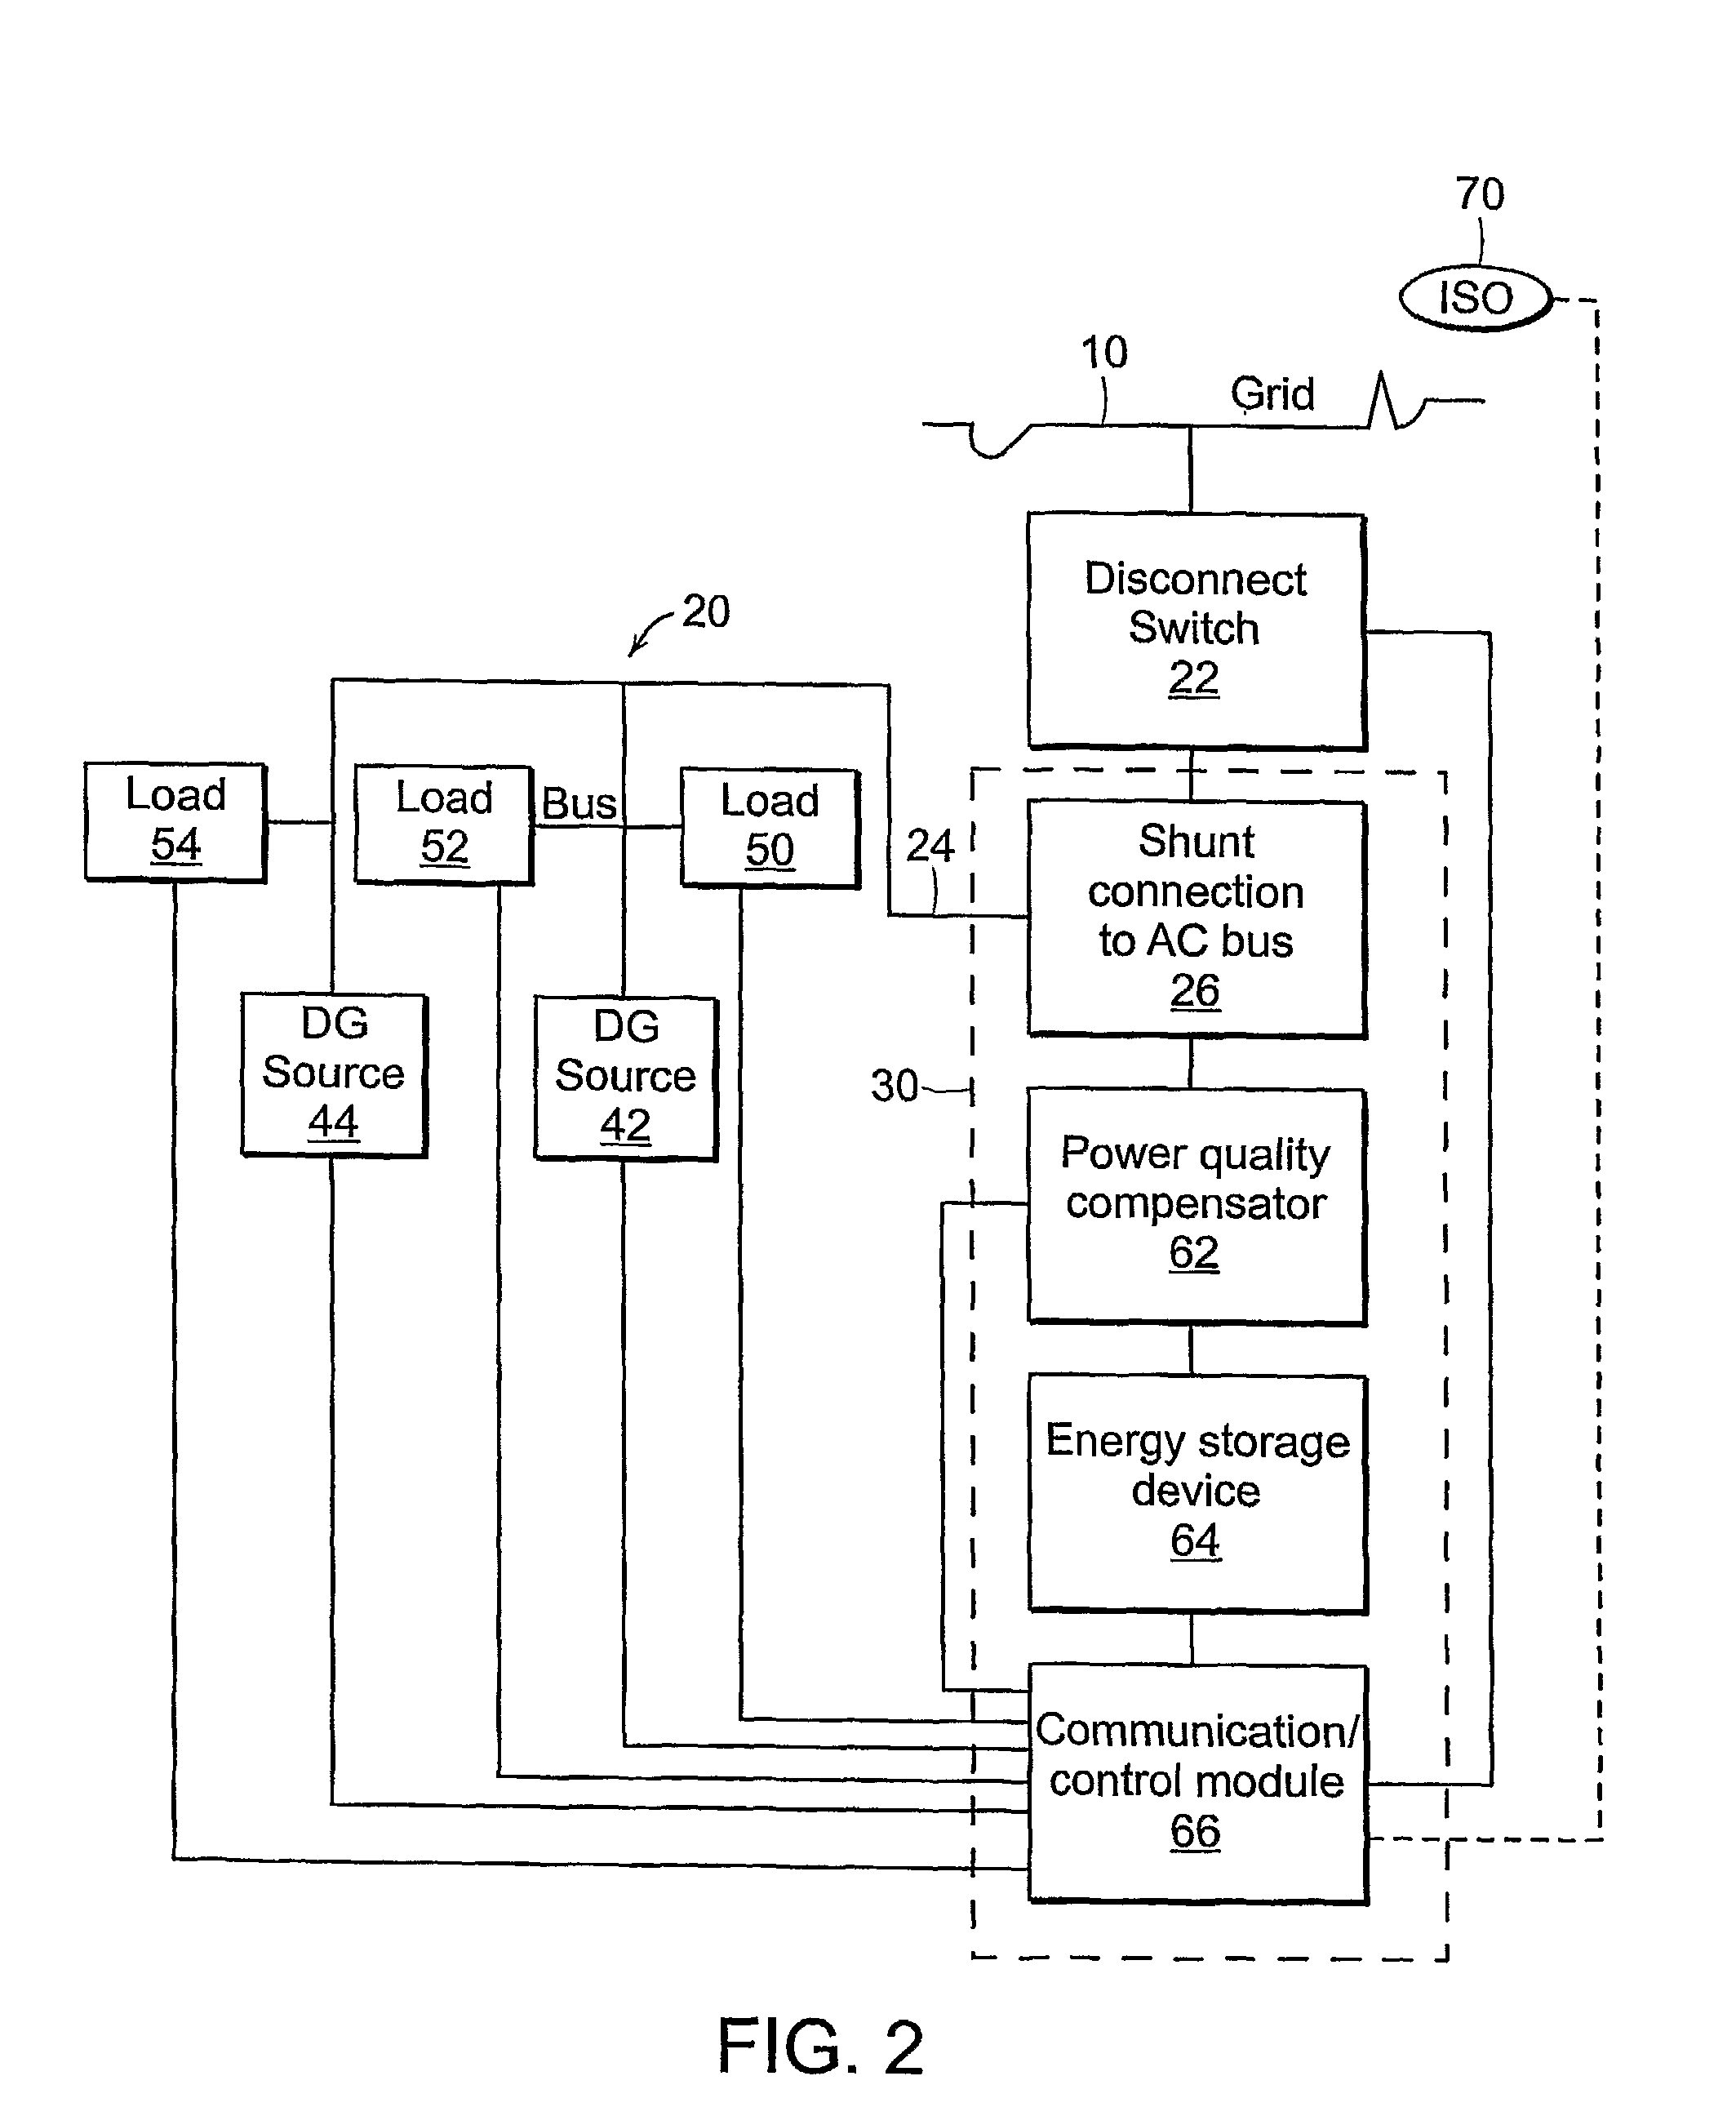 Methods and Systems for Intentionally Isolating Distributed Power Generation Sources